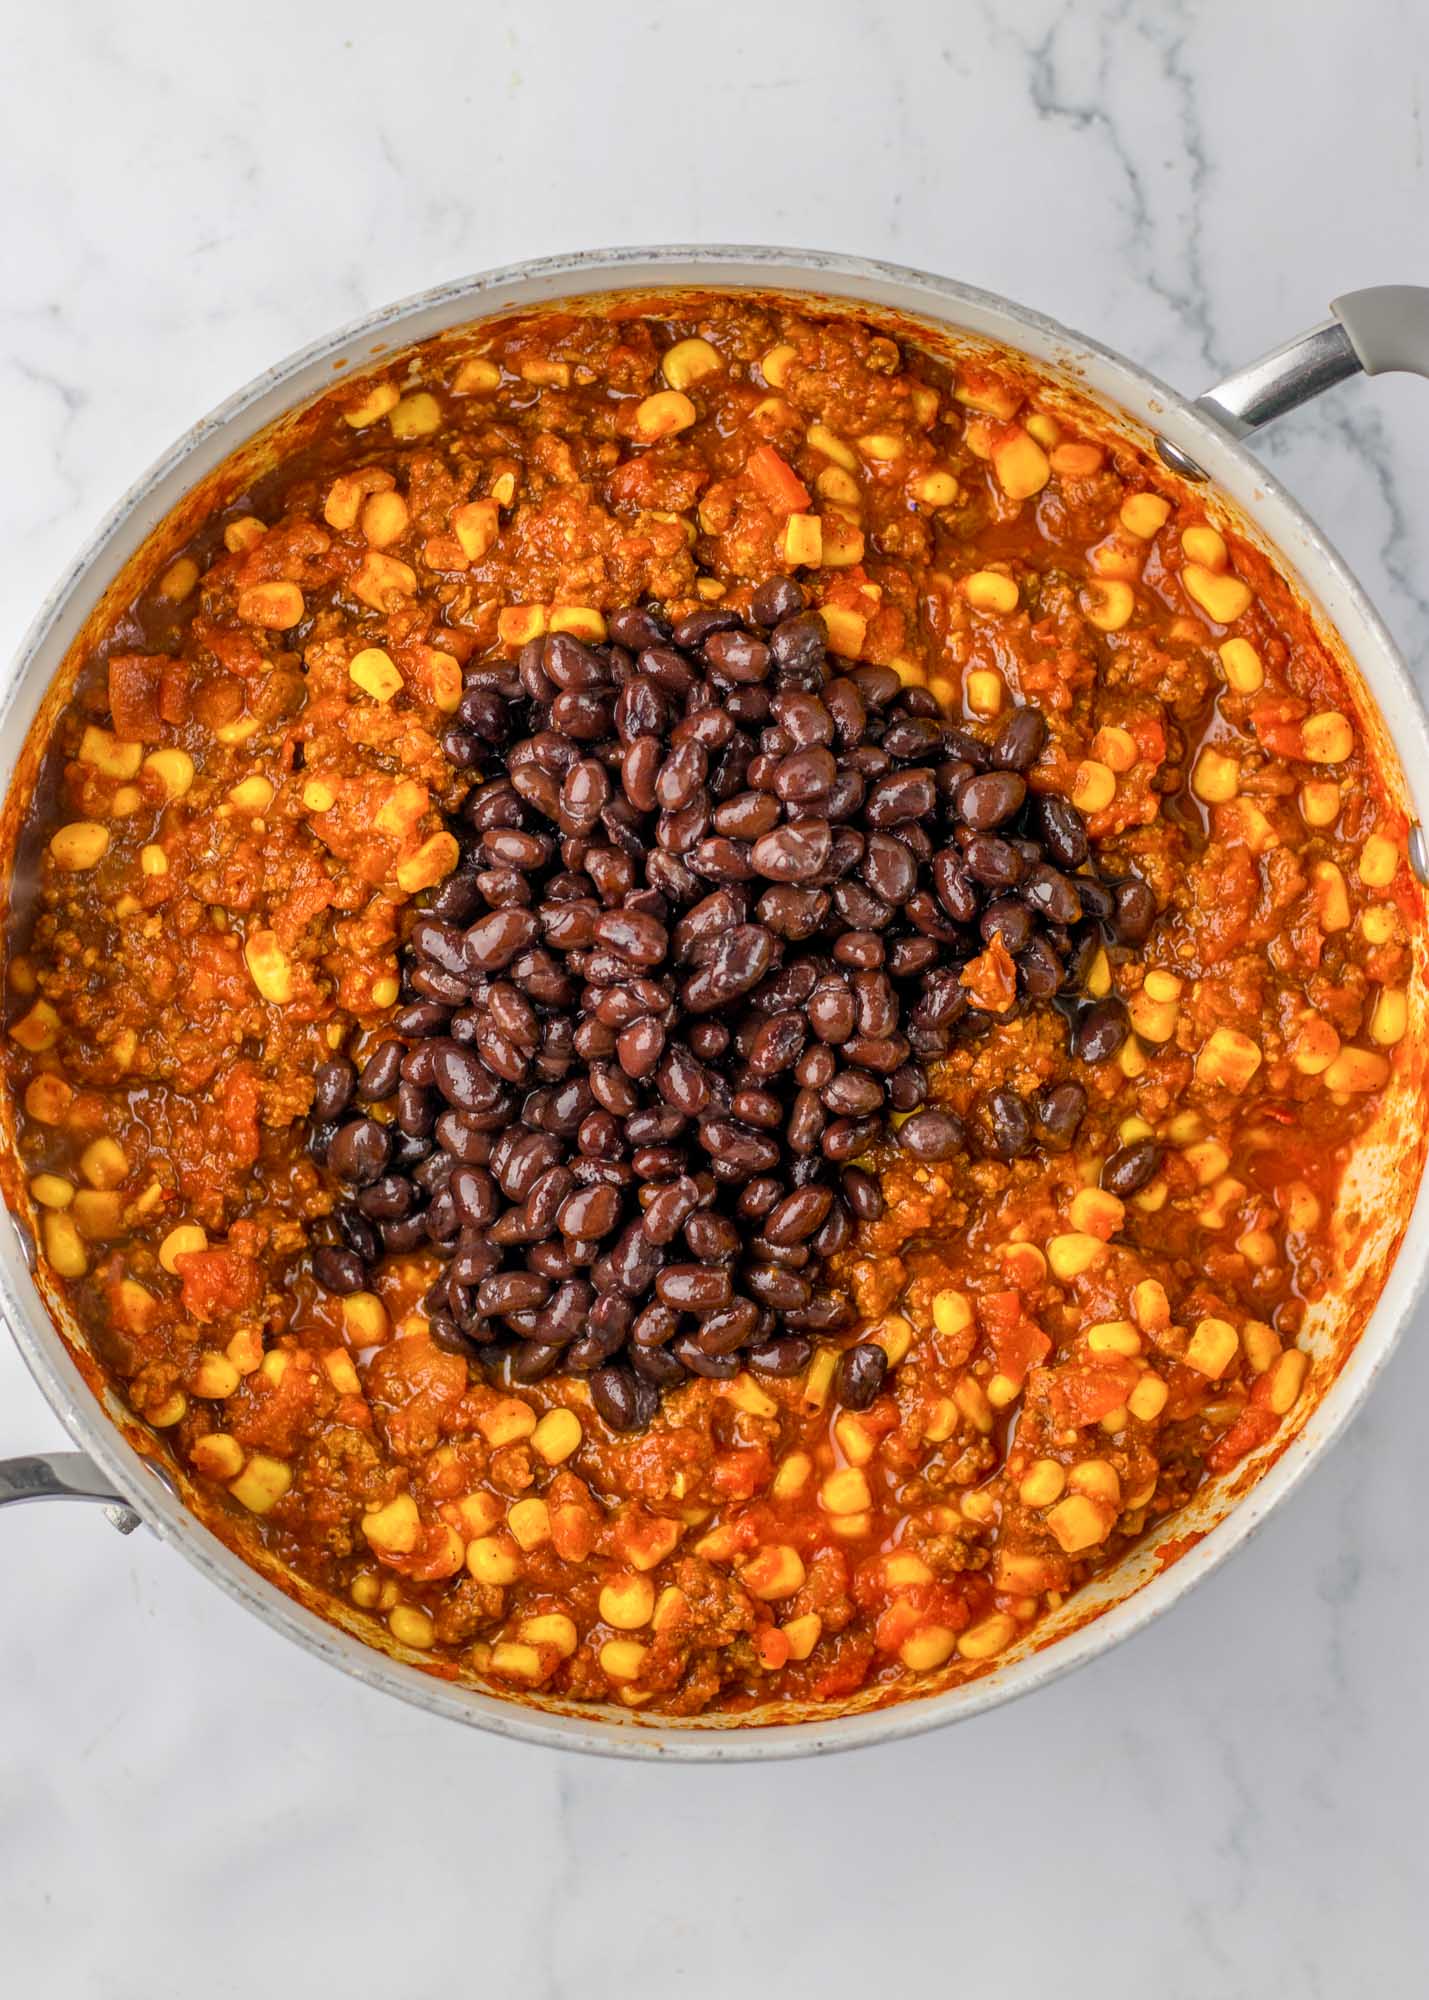 Added beans to the chili in a skillet